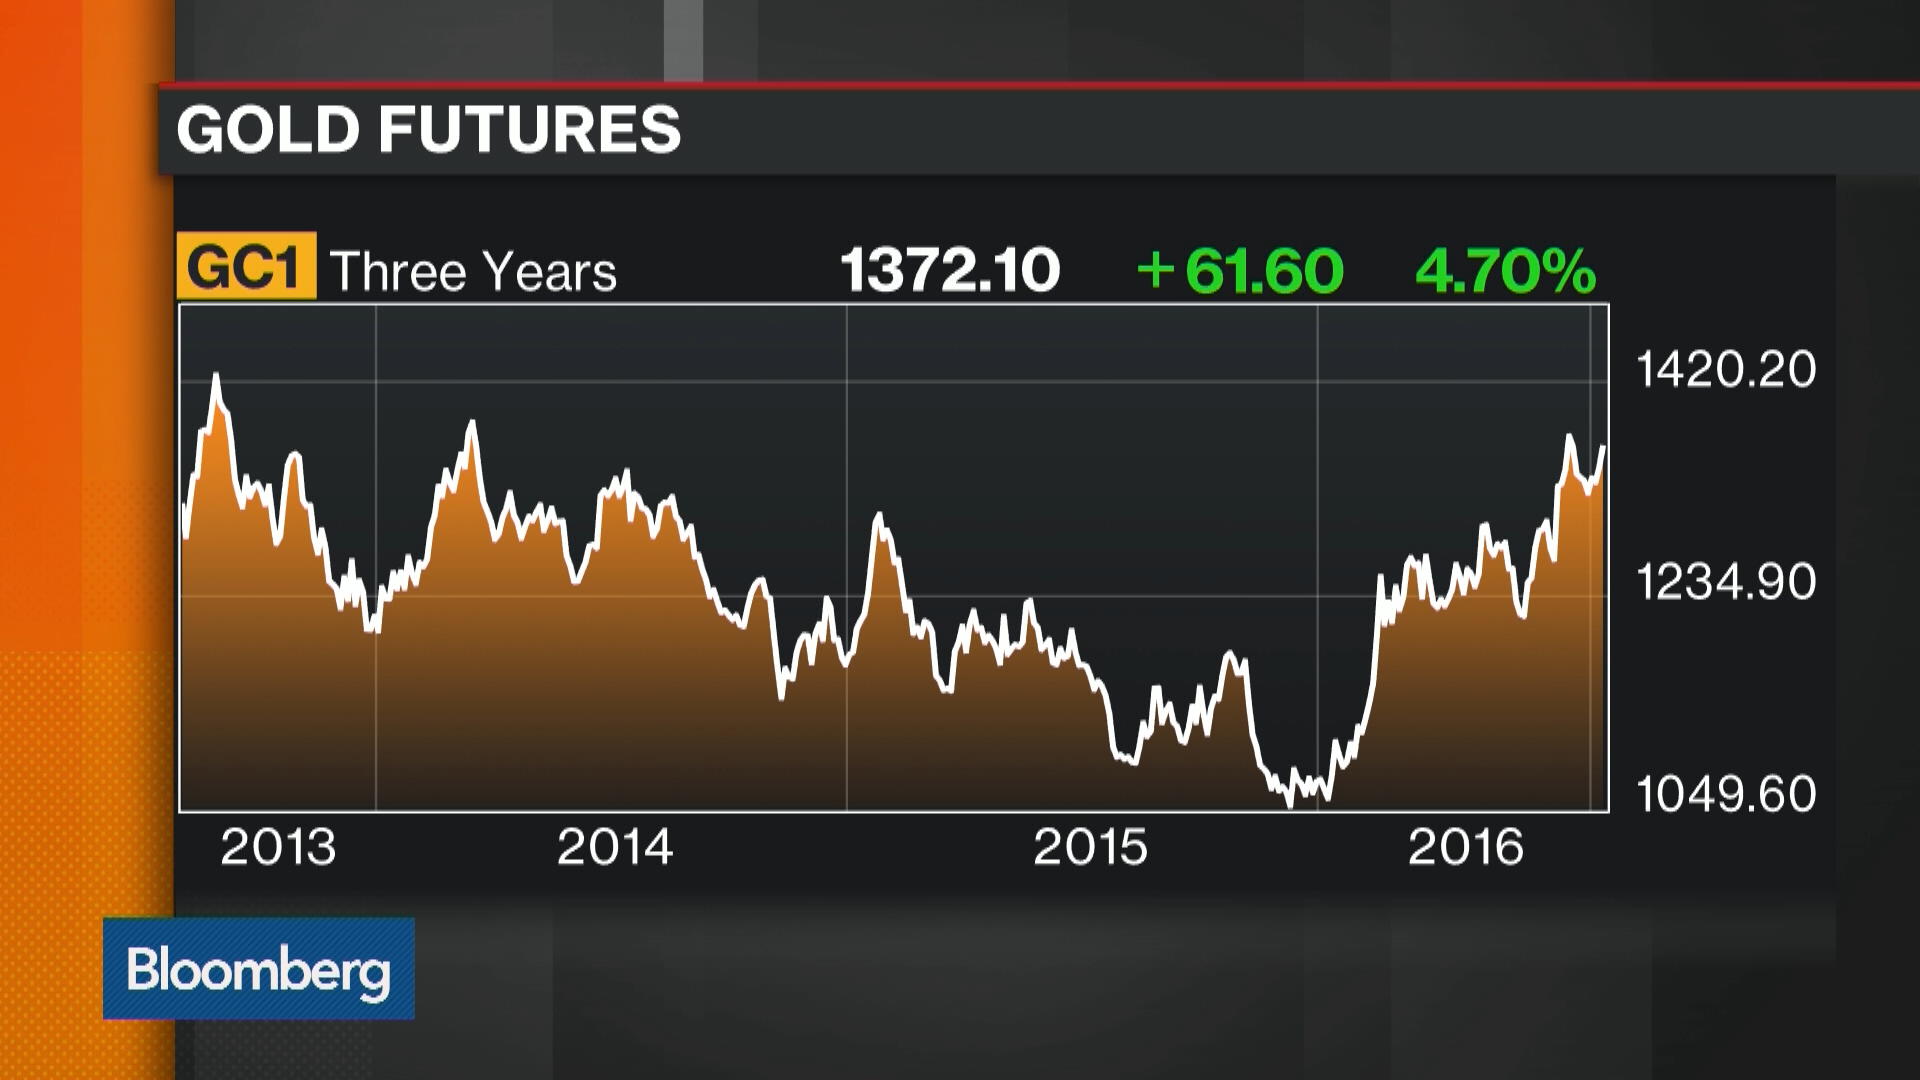 Watch Will the Price of Gold Continue to Rise? Bloomberg